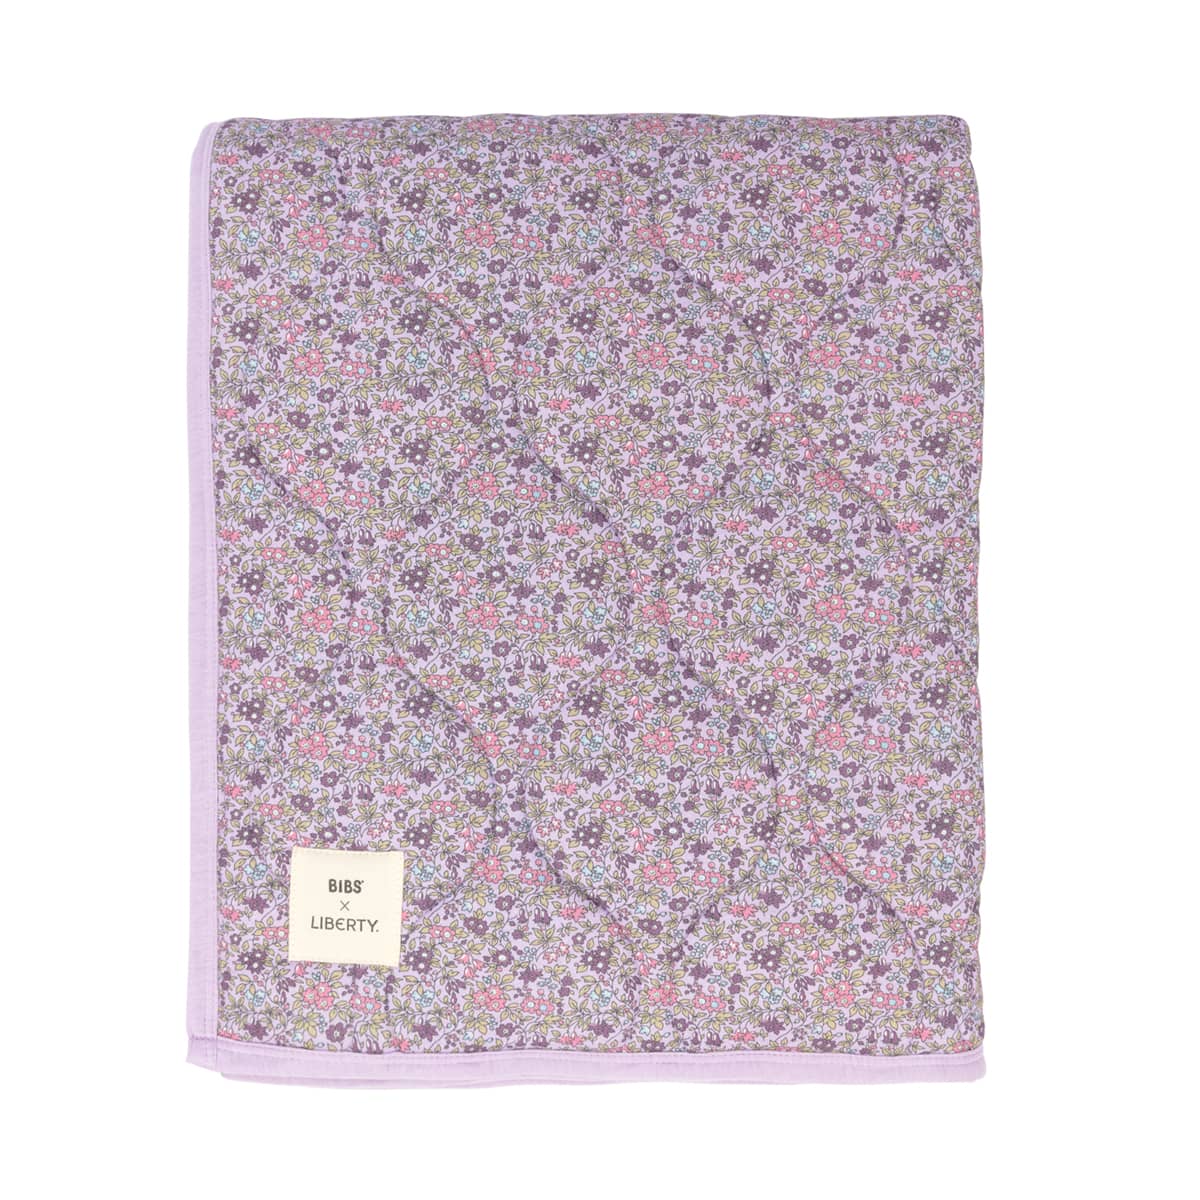 BIBS x LIBERTY Quilted Blanket - Chamomile Lawn / Violet Sky